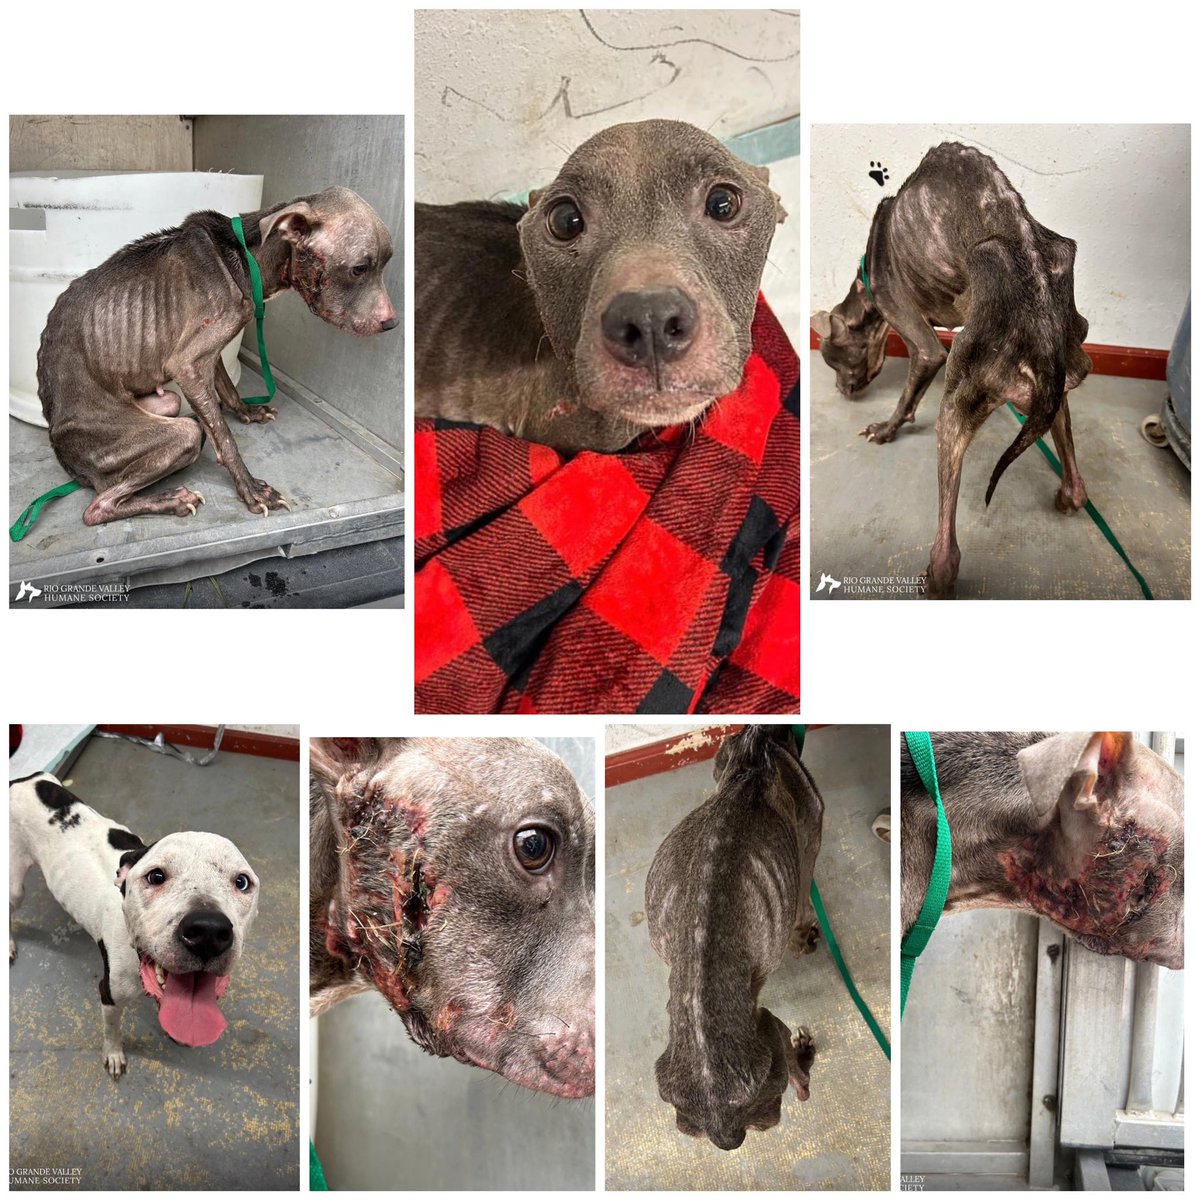 ‼️Emergency Rio Grande Valley Humane Society #Texas ‼️ 2 dogs arrived in extreme conditions after being discovered in a home with no caretaker after their owner died Emergency fosters & rescue needed rescue@rgvhs.org Donations to rgvhs.org/donate #dogsoftwitter #animals